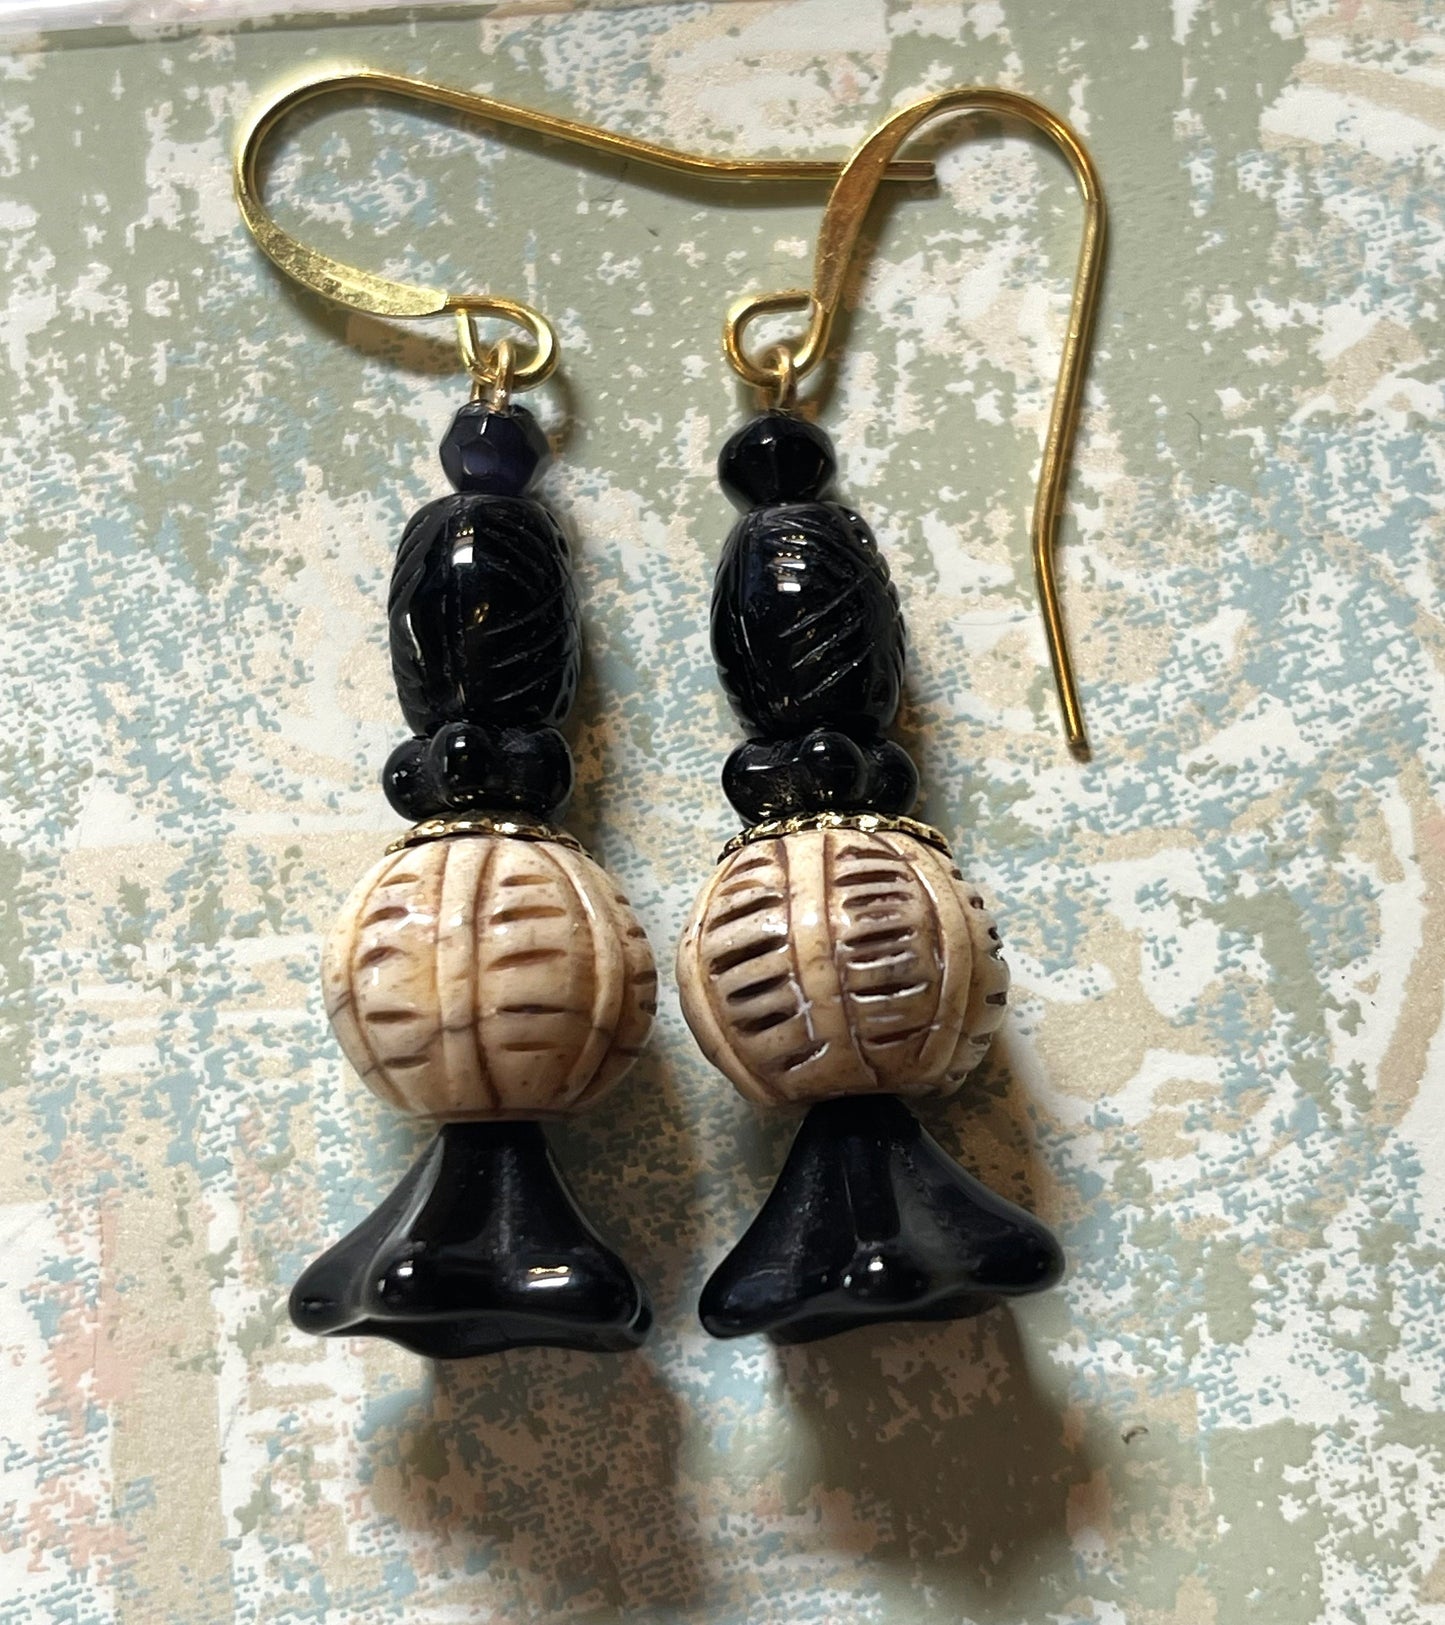 Vintage Earrings, Black, earth-tone carved beads, Czech glass. Hypoallergenic French Earring Hooks, Gold Plated Wire